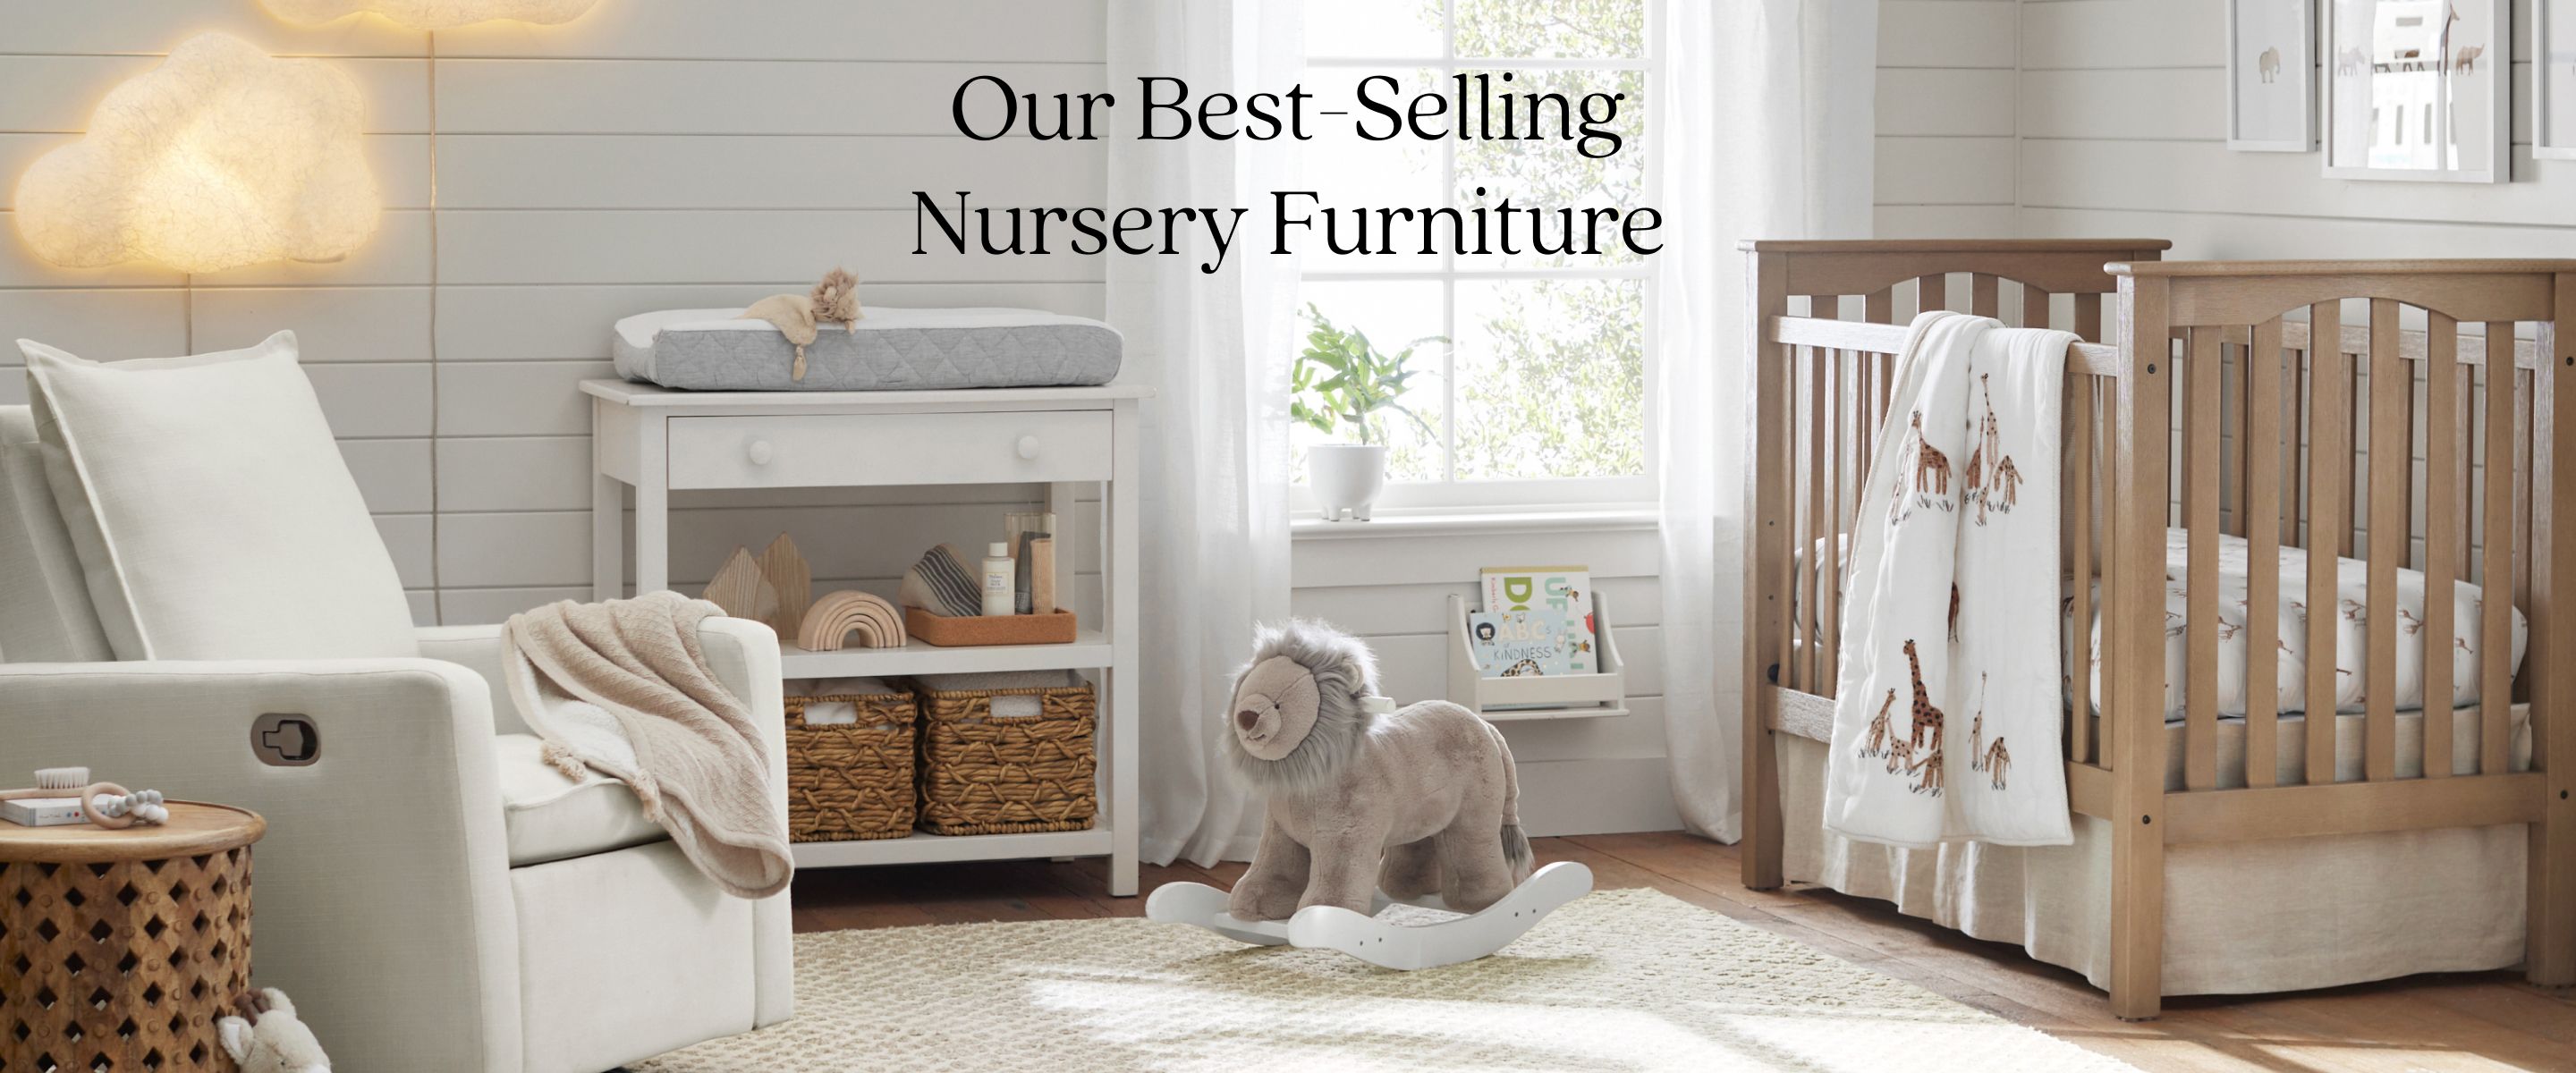 Our Best-Selling Nursery Furniture